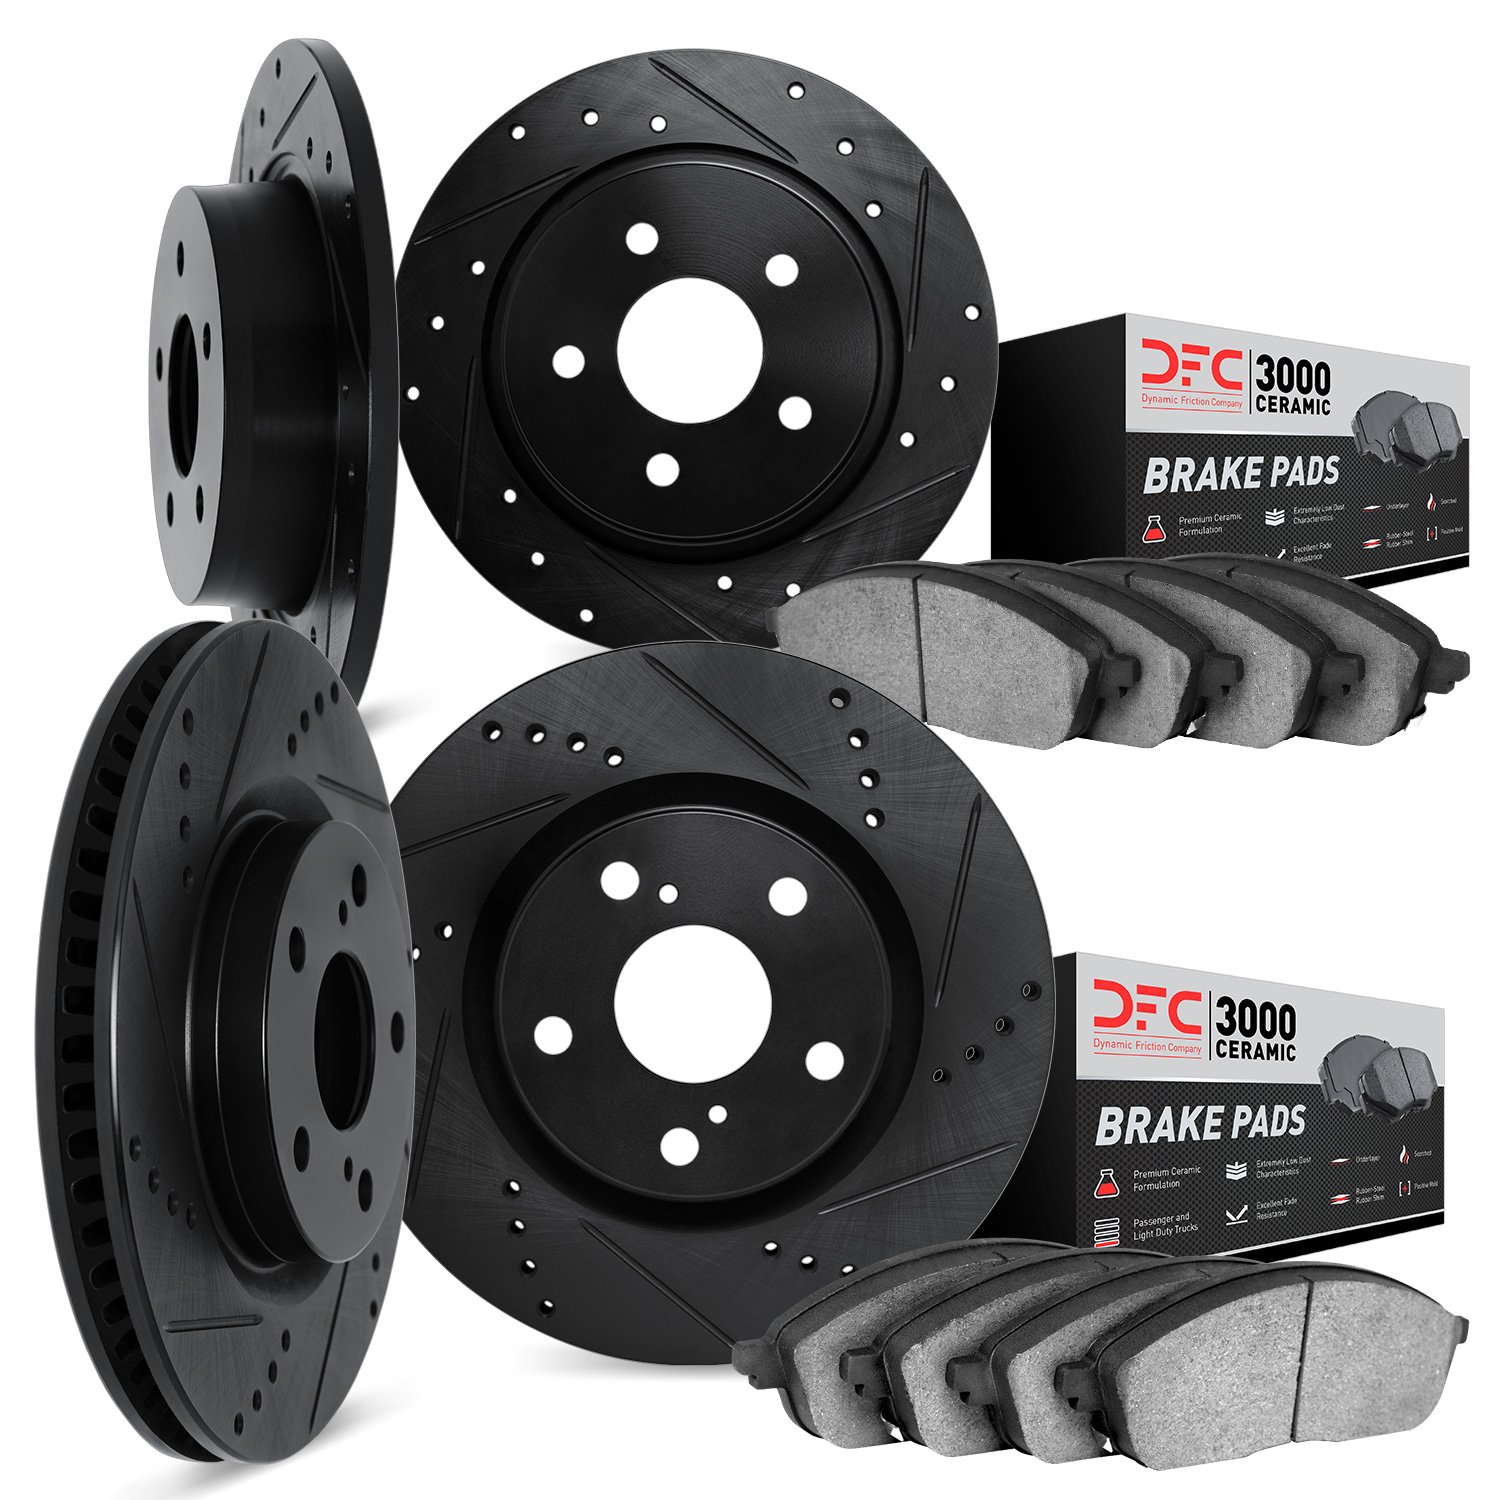 8304-59079 Drilled/Slotted Brake Rotors with 3000-Series Ceramic Brake Pads Kit [Black], 2016-2017 Acura/Honda, Position: Front